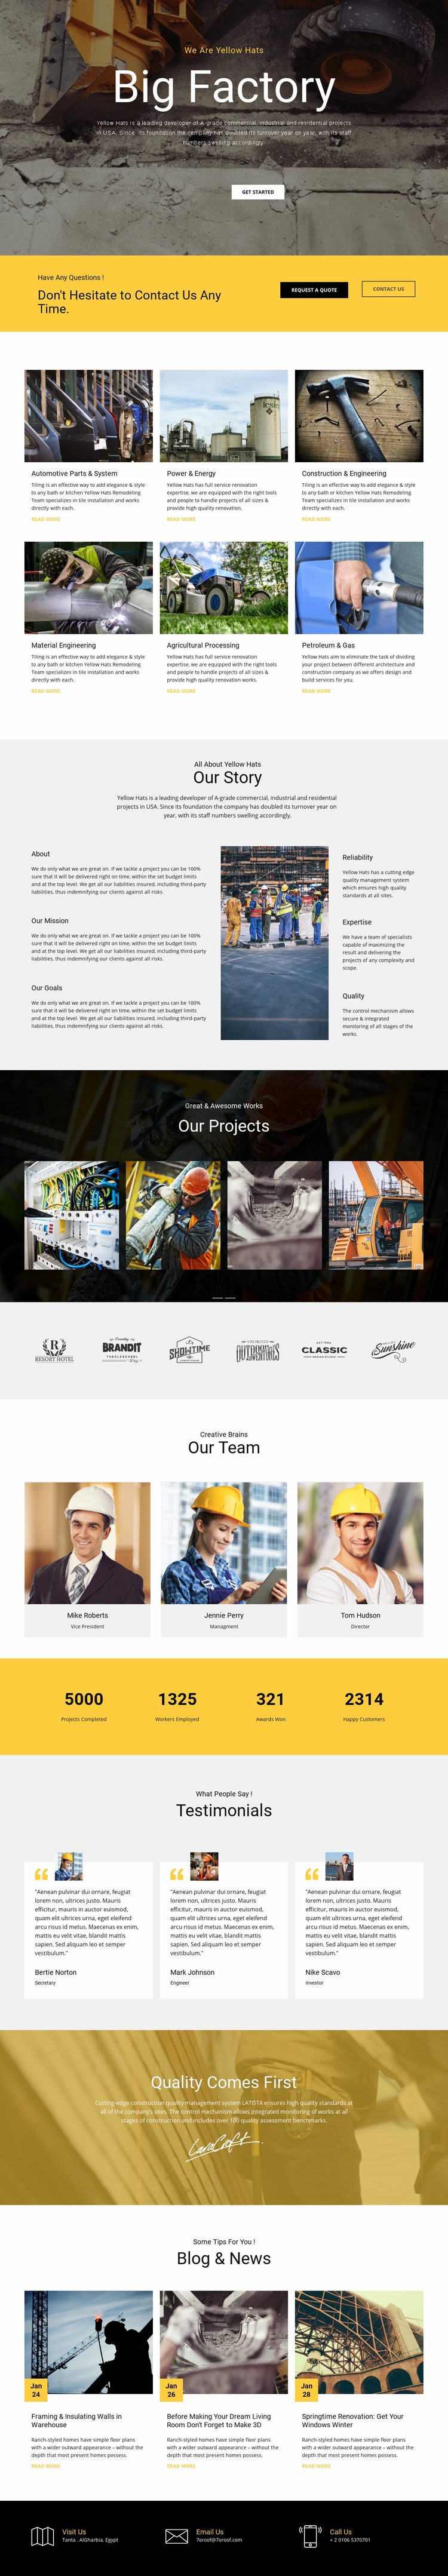 Factory works industrial Web Page Design